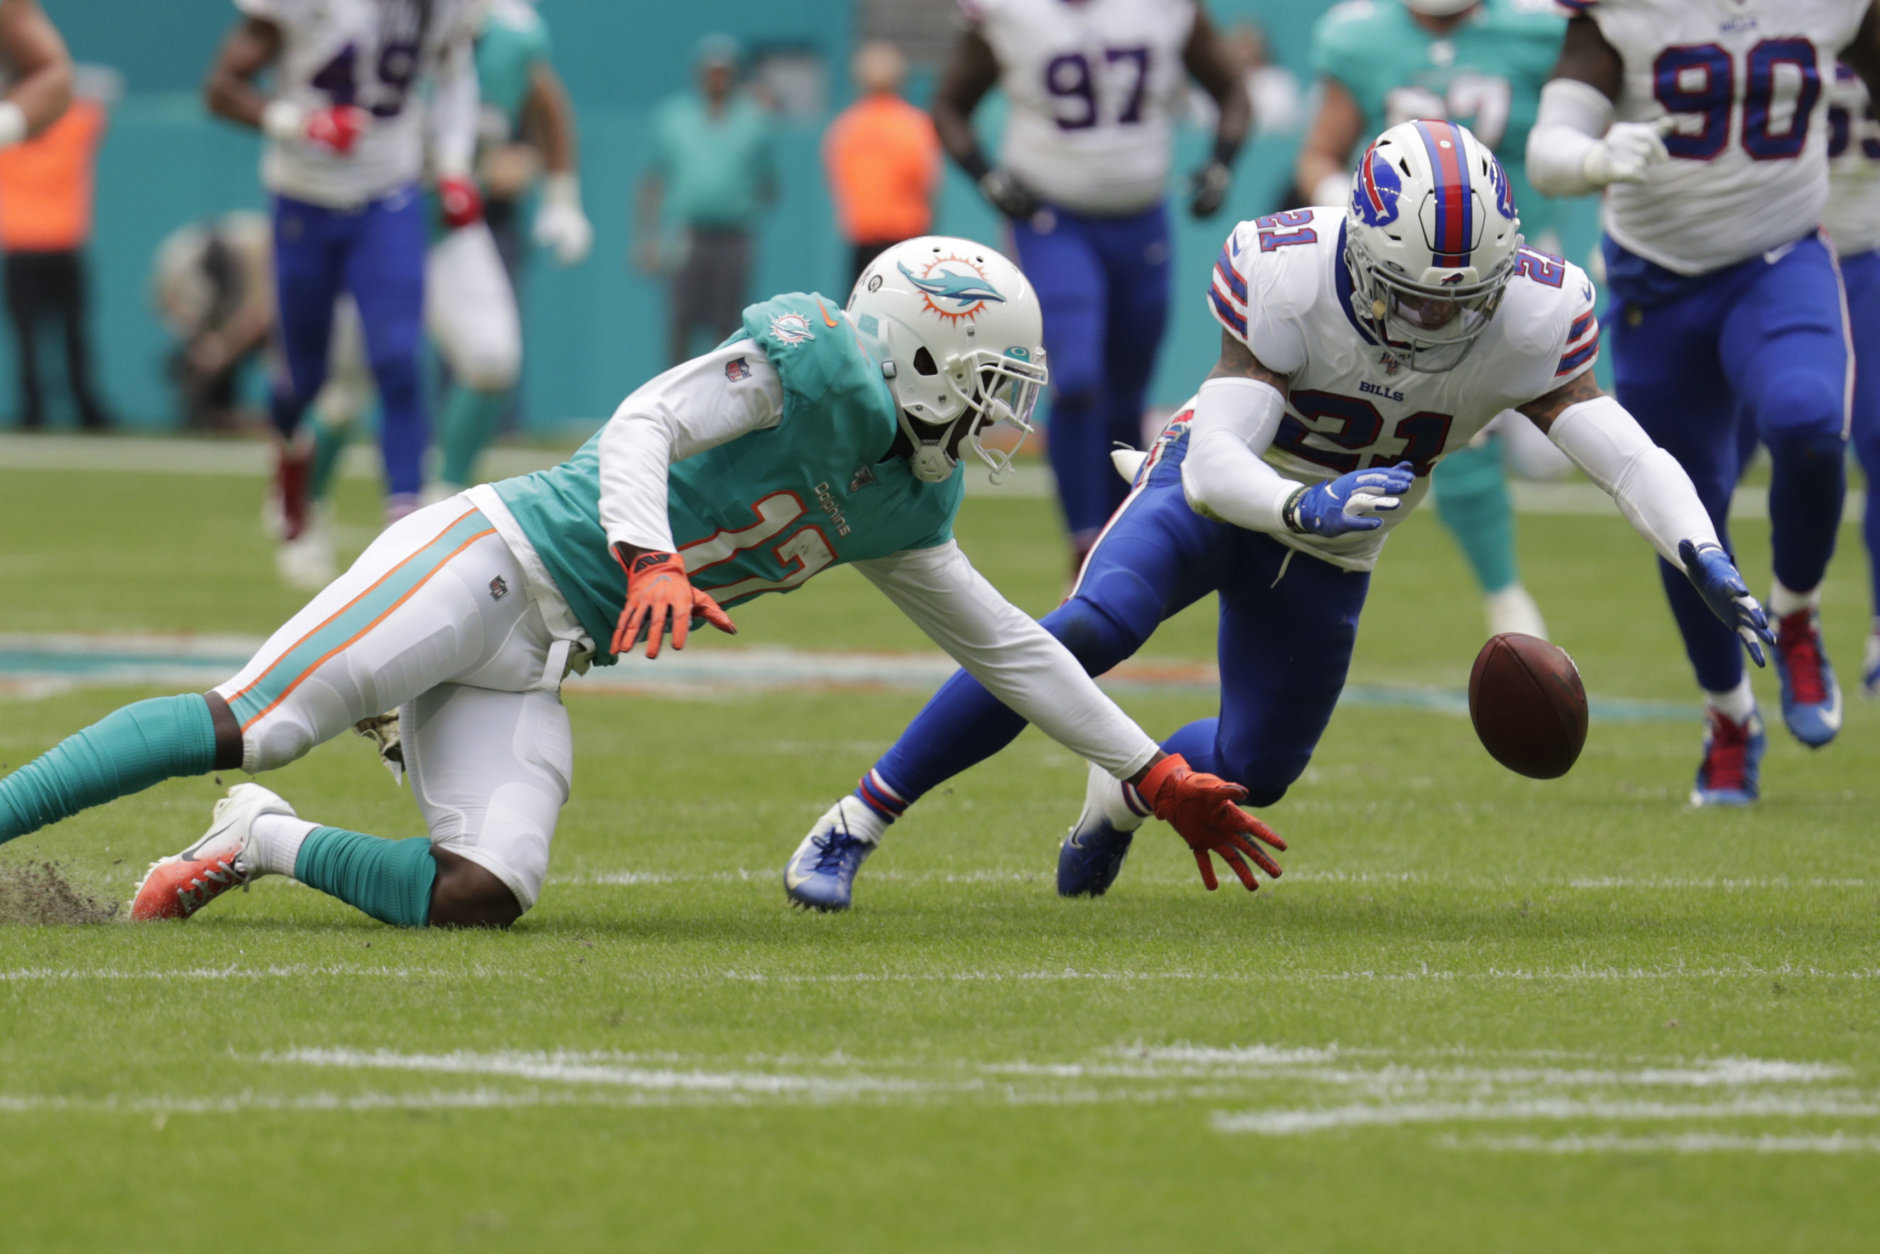 <p><b><i>Bills 37</i></b><br />
<b><i>Dolphins 20</i></b></p>
<p>When Miami was trying to lose, they won two straight. Now that they&#8217;re <a href="https://profootballtalk.nbcsports.com/2019/11/16/brian-flores-told-dolphins-forget-the-draft-were-trying-to-win-games/" target="_blank" rel="noopener" data-saferedirecturl="https://www.google.com/url?q=https://profootballtalk.nbcsports.com/2019/11/16/brian-flores-told-dolphins-forget-the-draft-were-trying-to-win-games/&amp;source=gmail&amp;ust=1574133264451000&amp;usg=AFQjCNFvFuDLIYZbtbuXVtkZm-rt1rDoqQ">trying to win</a>, they lose. The Dolphins probably wish they held on to the good, young players they gave up for draft picks now that <a href="https://www.espn.com/college-football/story/_/id/28093292/alabama-qb-tua-tagovailoa-getting-x-rays-hip-injury" target="_blank" rel="noopener" data-saferedirecturl="https://www.google.com/url?q=https://www.espn.com/college-football/story/_/id/28093292/alabama-qb-tua-tagovailoa-getting-x-rays-hip-injury&amp;source=gmail&amp;ust=1574133264451000&amp;usg=AFQjCNG9xmweXIjeY1RzUTdvabpvFWqbdQ">&#8220;Tanking for Tua is off the table.</a></p>
